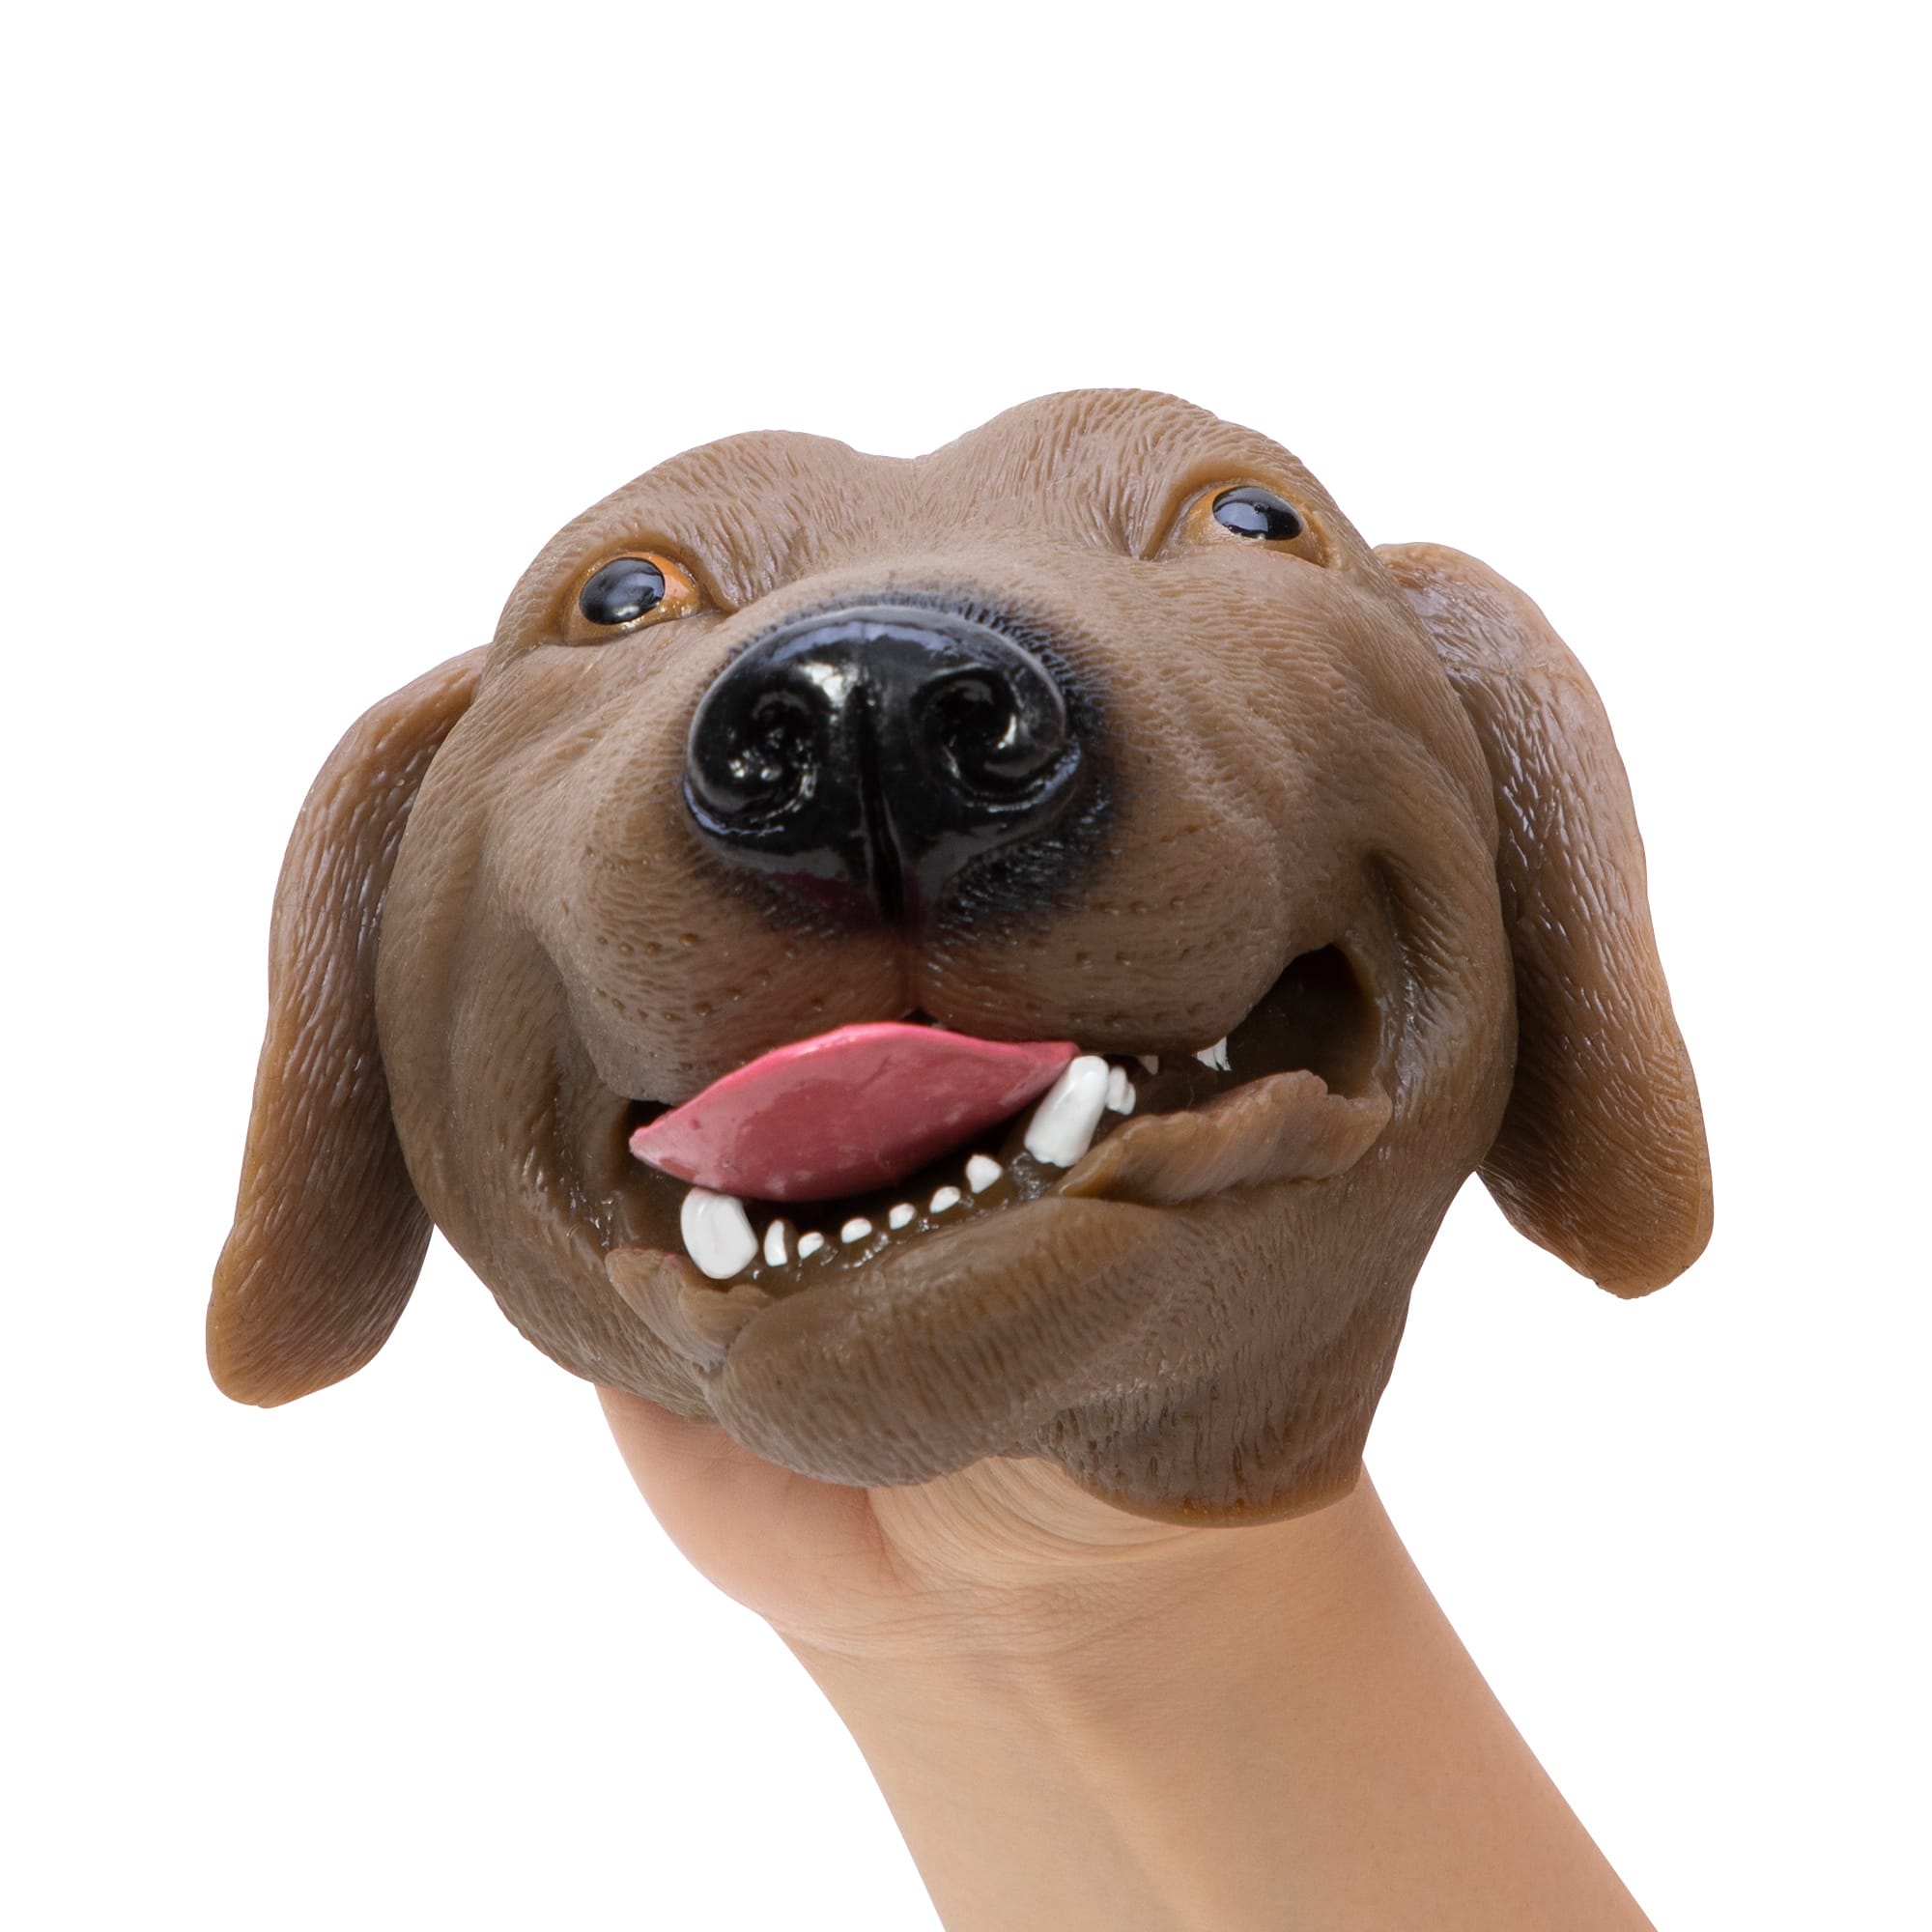 Dog Hand Puppet - Yellow, Brown or Black    